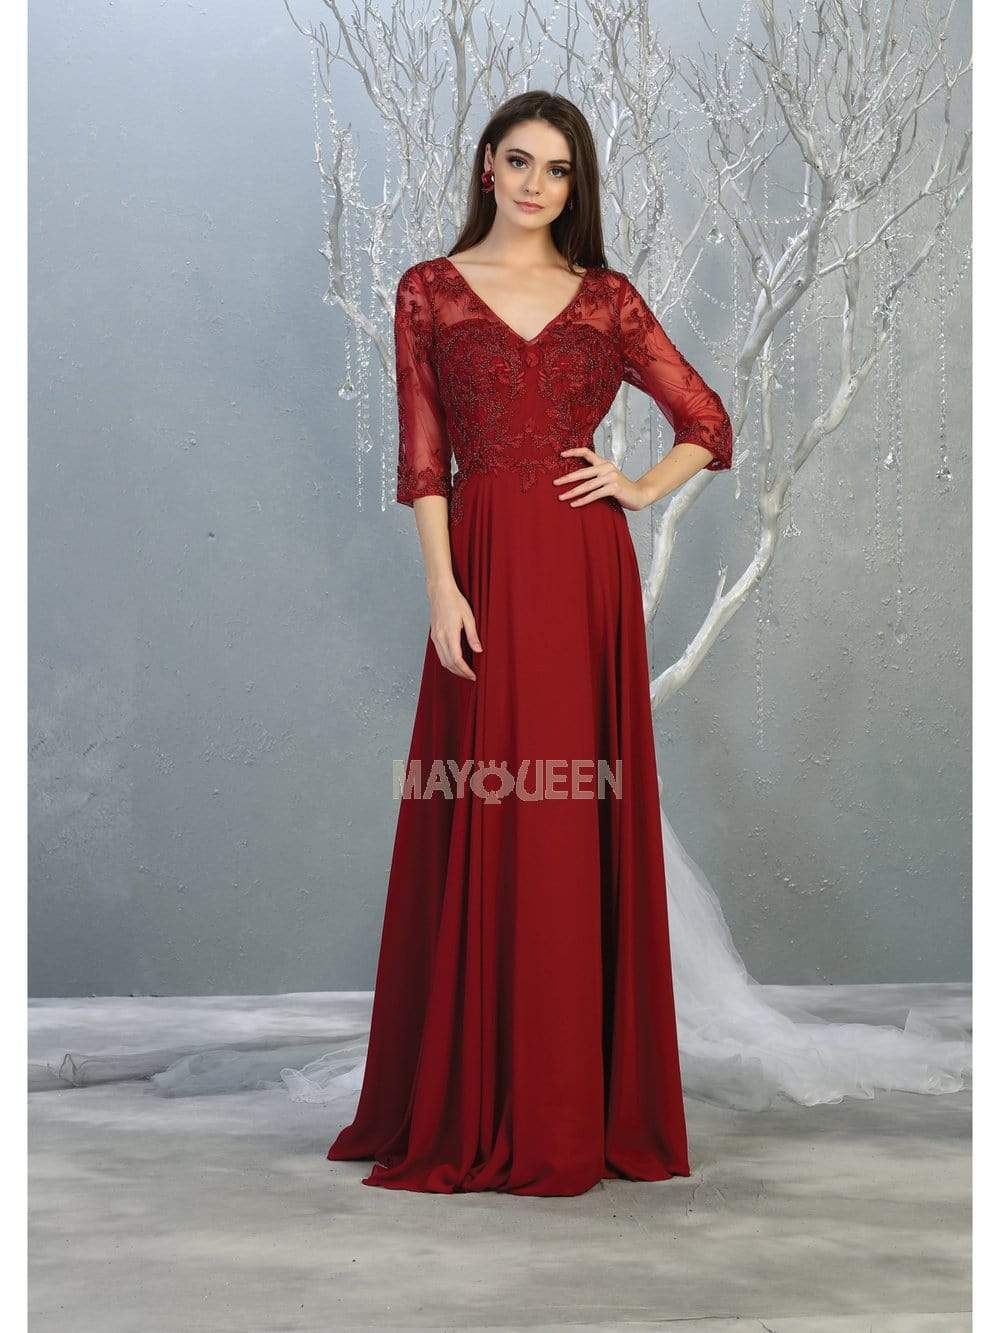 May Queen - RQ7820 Bead Embellished V-Neck A-Line Dress Mother of the Bride Dresses M / Burgundy